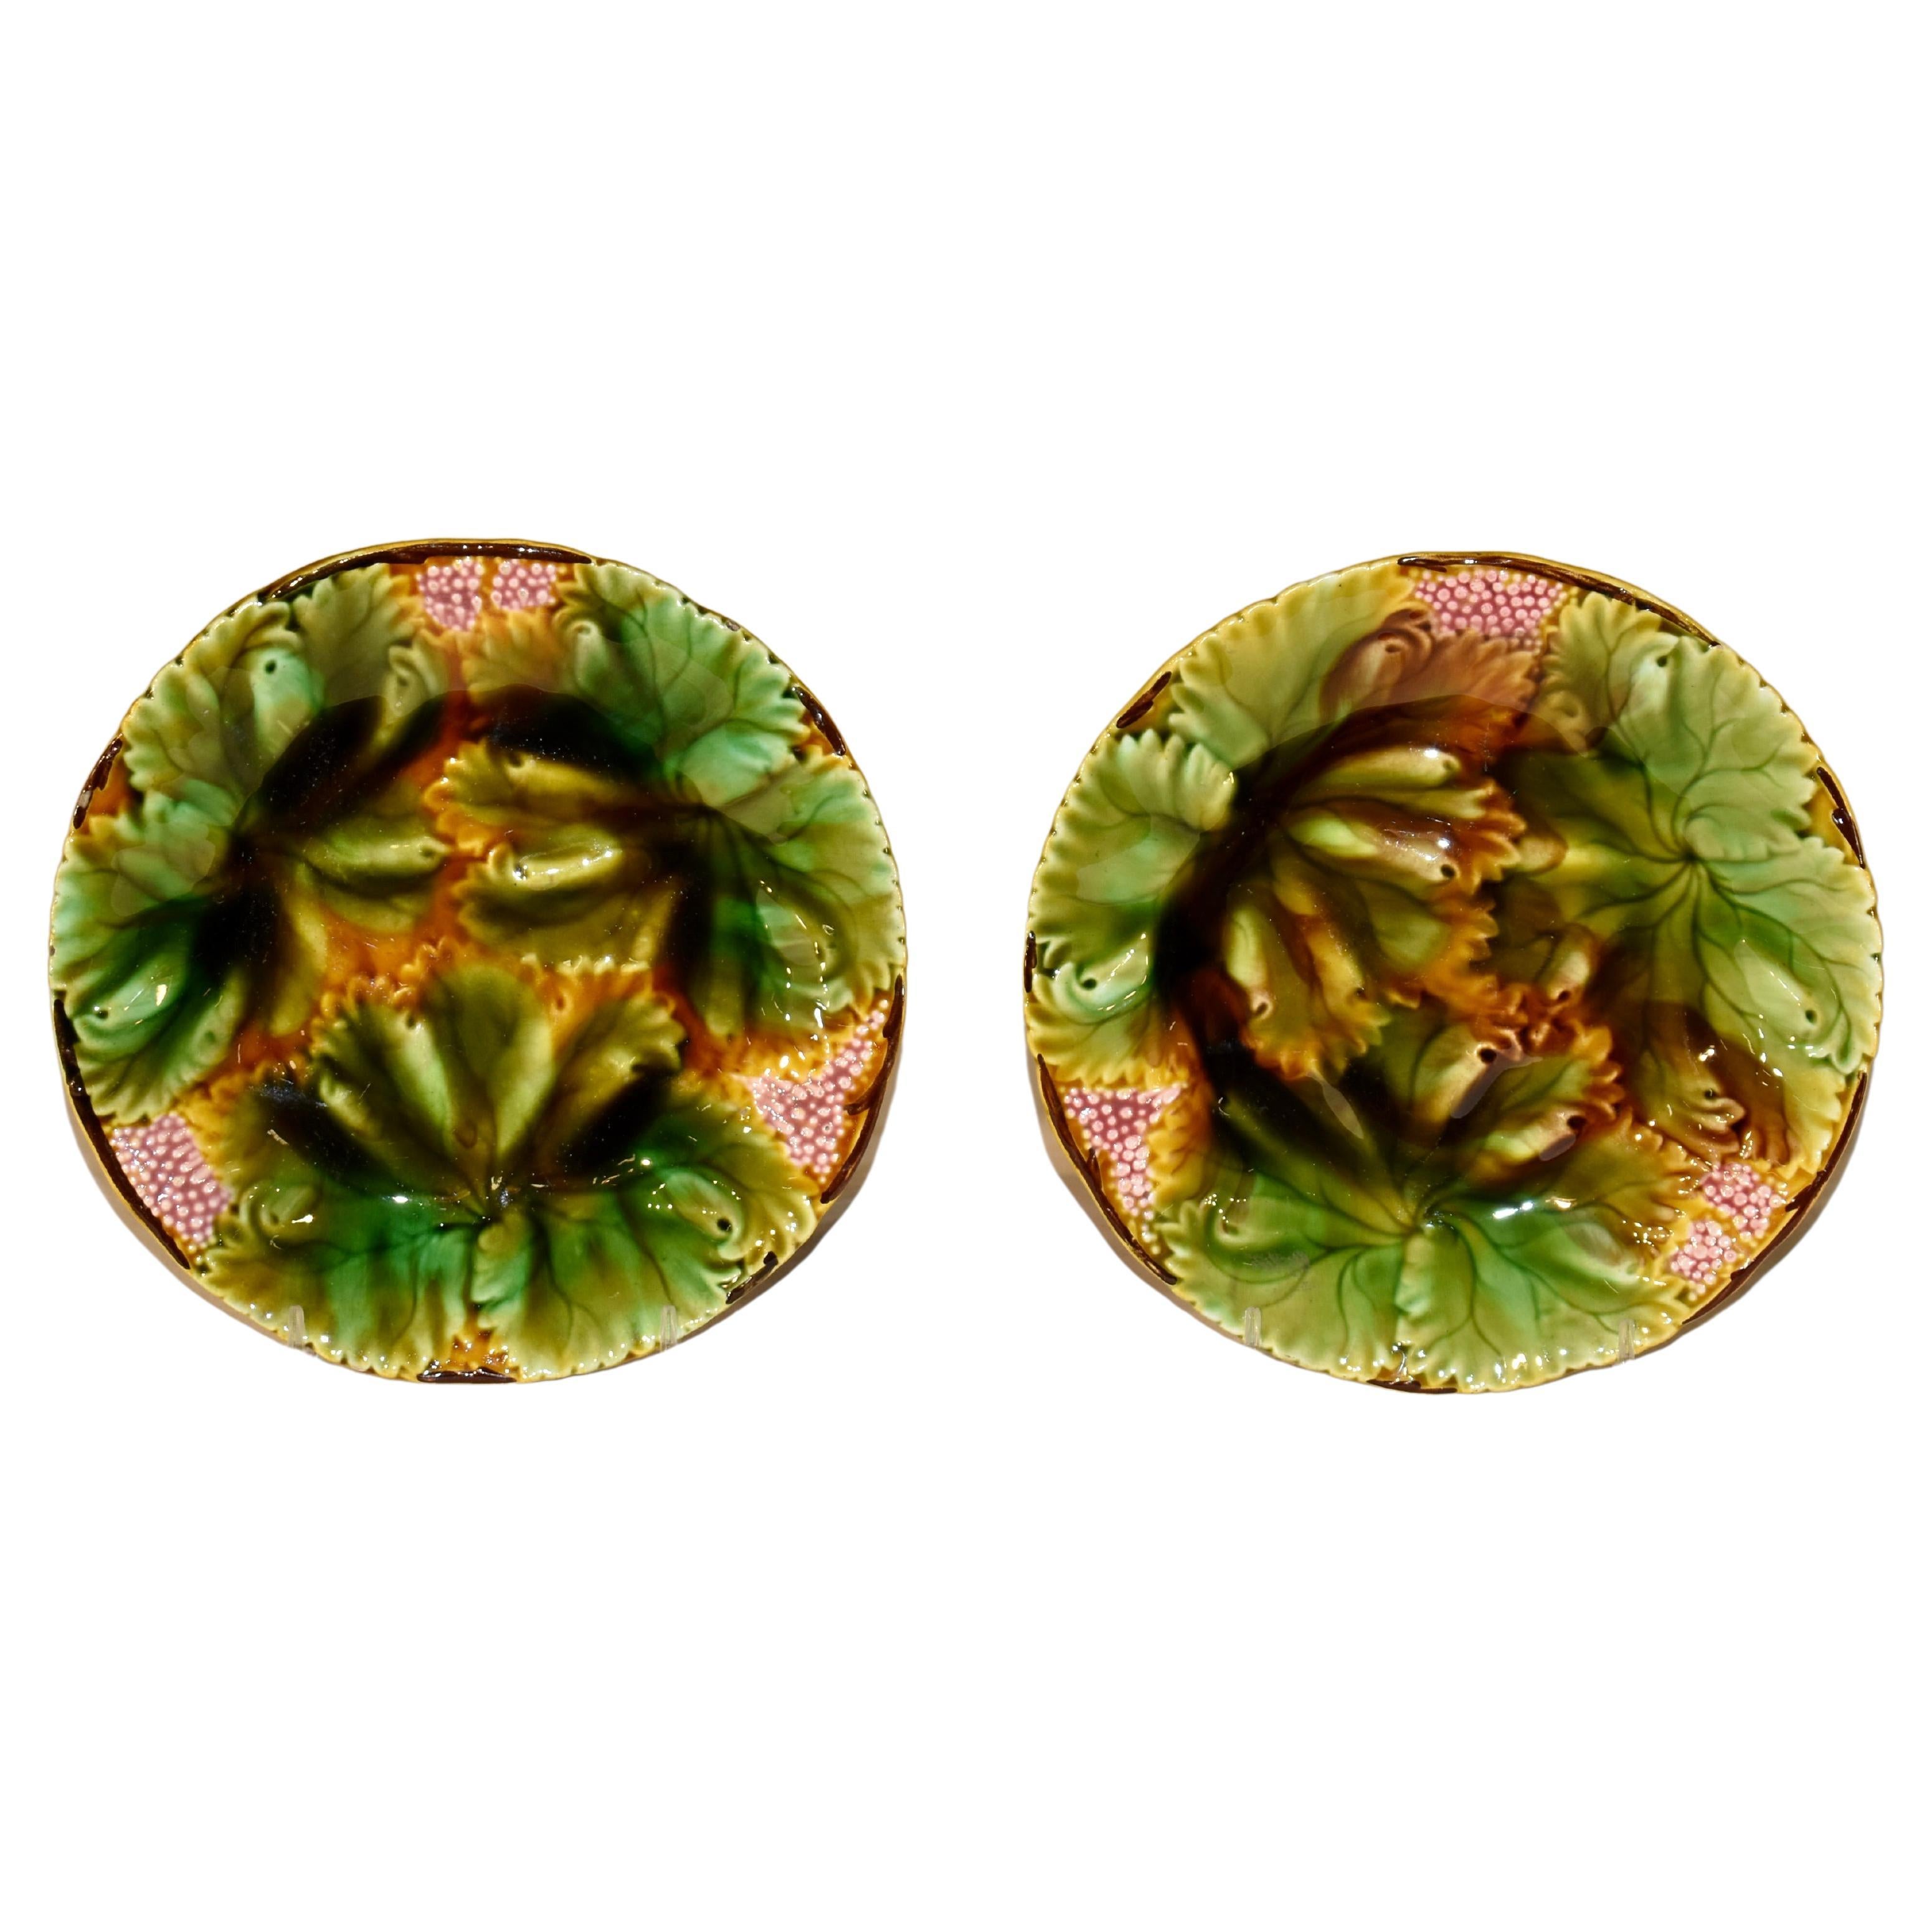 Pair of 19th Century Villeroy and Boch Majolica Plates